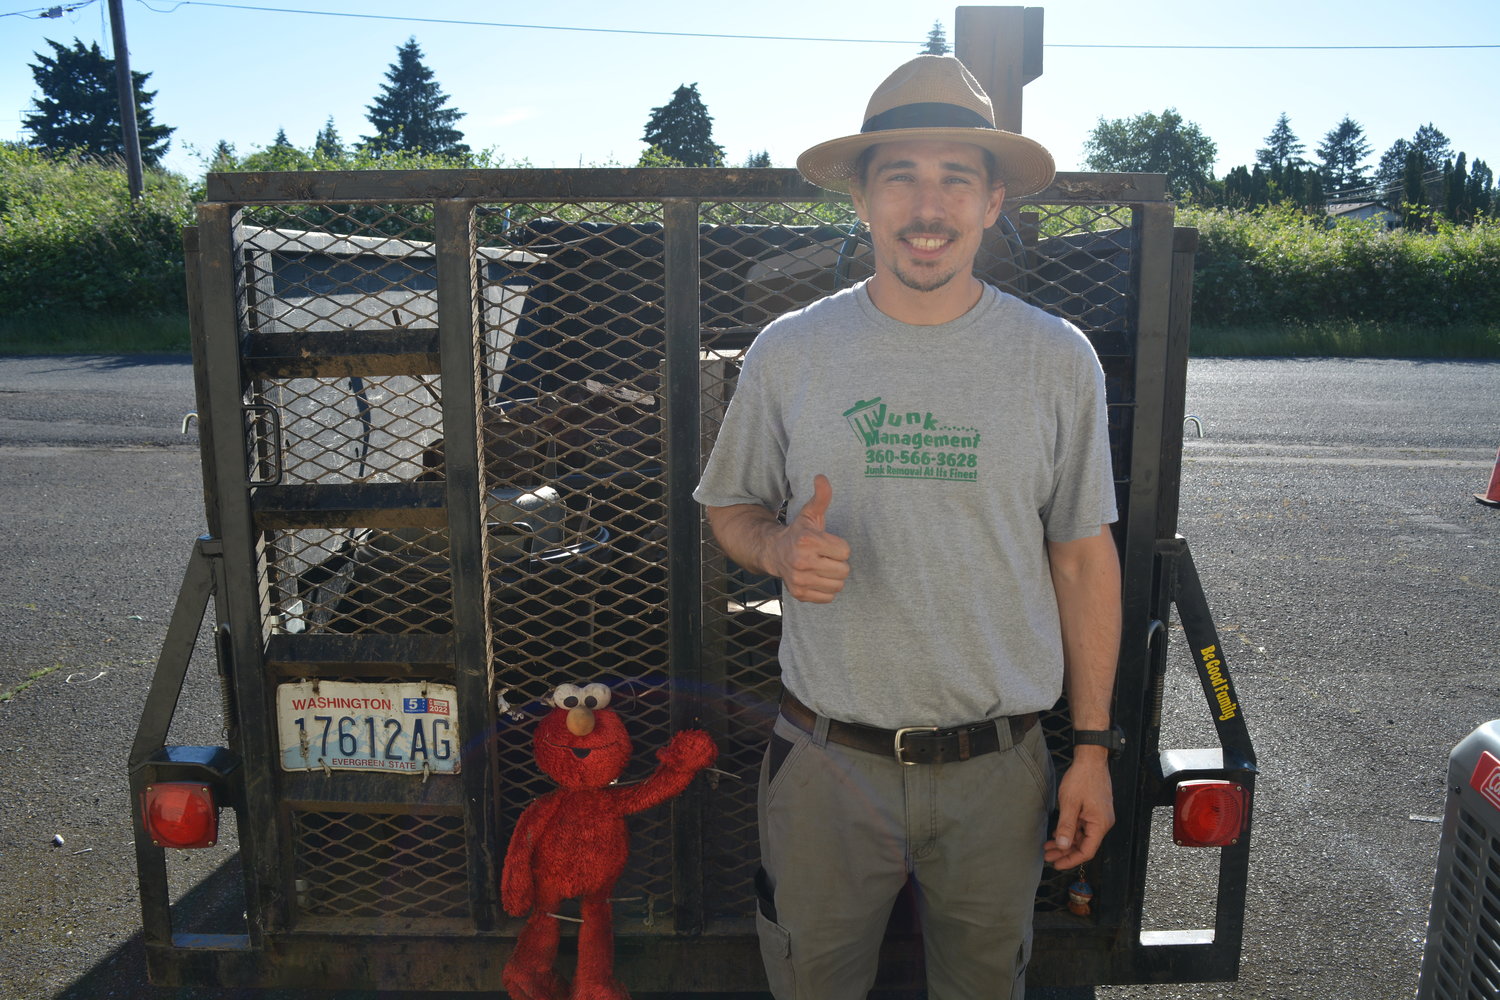 Dan Cain stands behind his Junk Management truck, which contains bricks and wood he acquired from a jobsite on June 22.